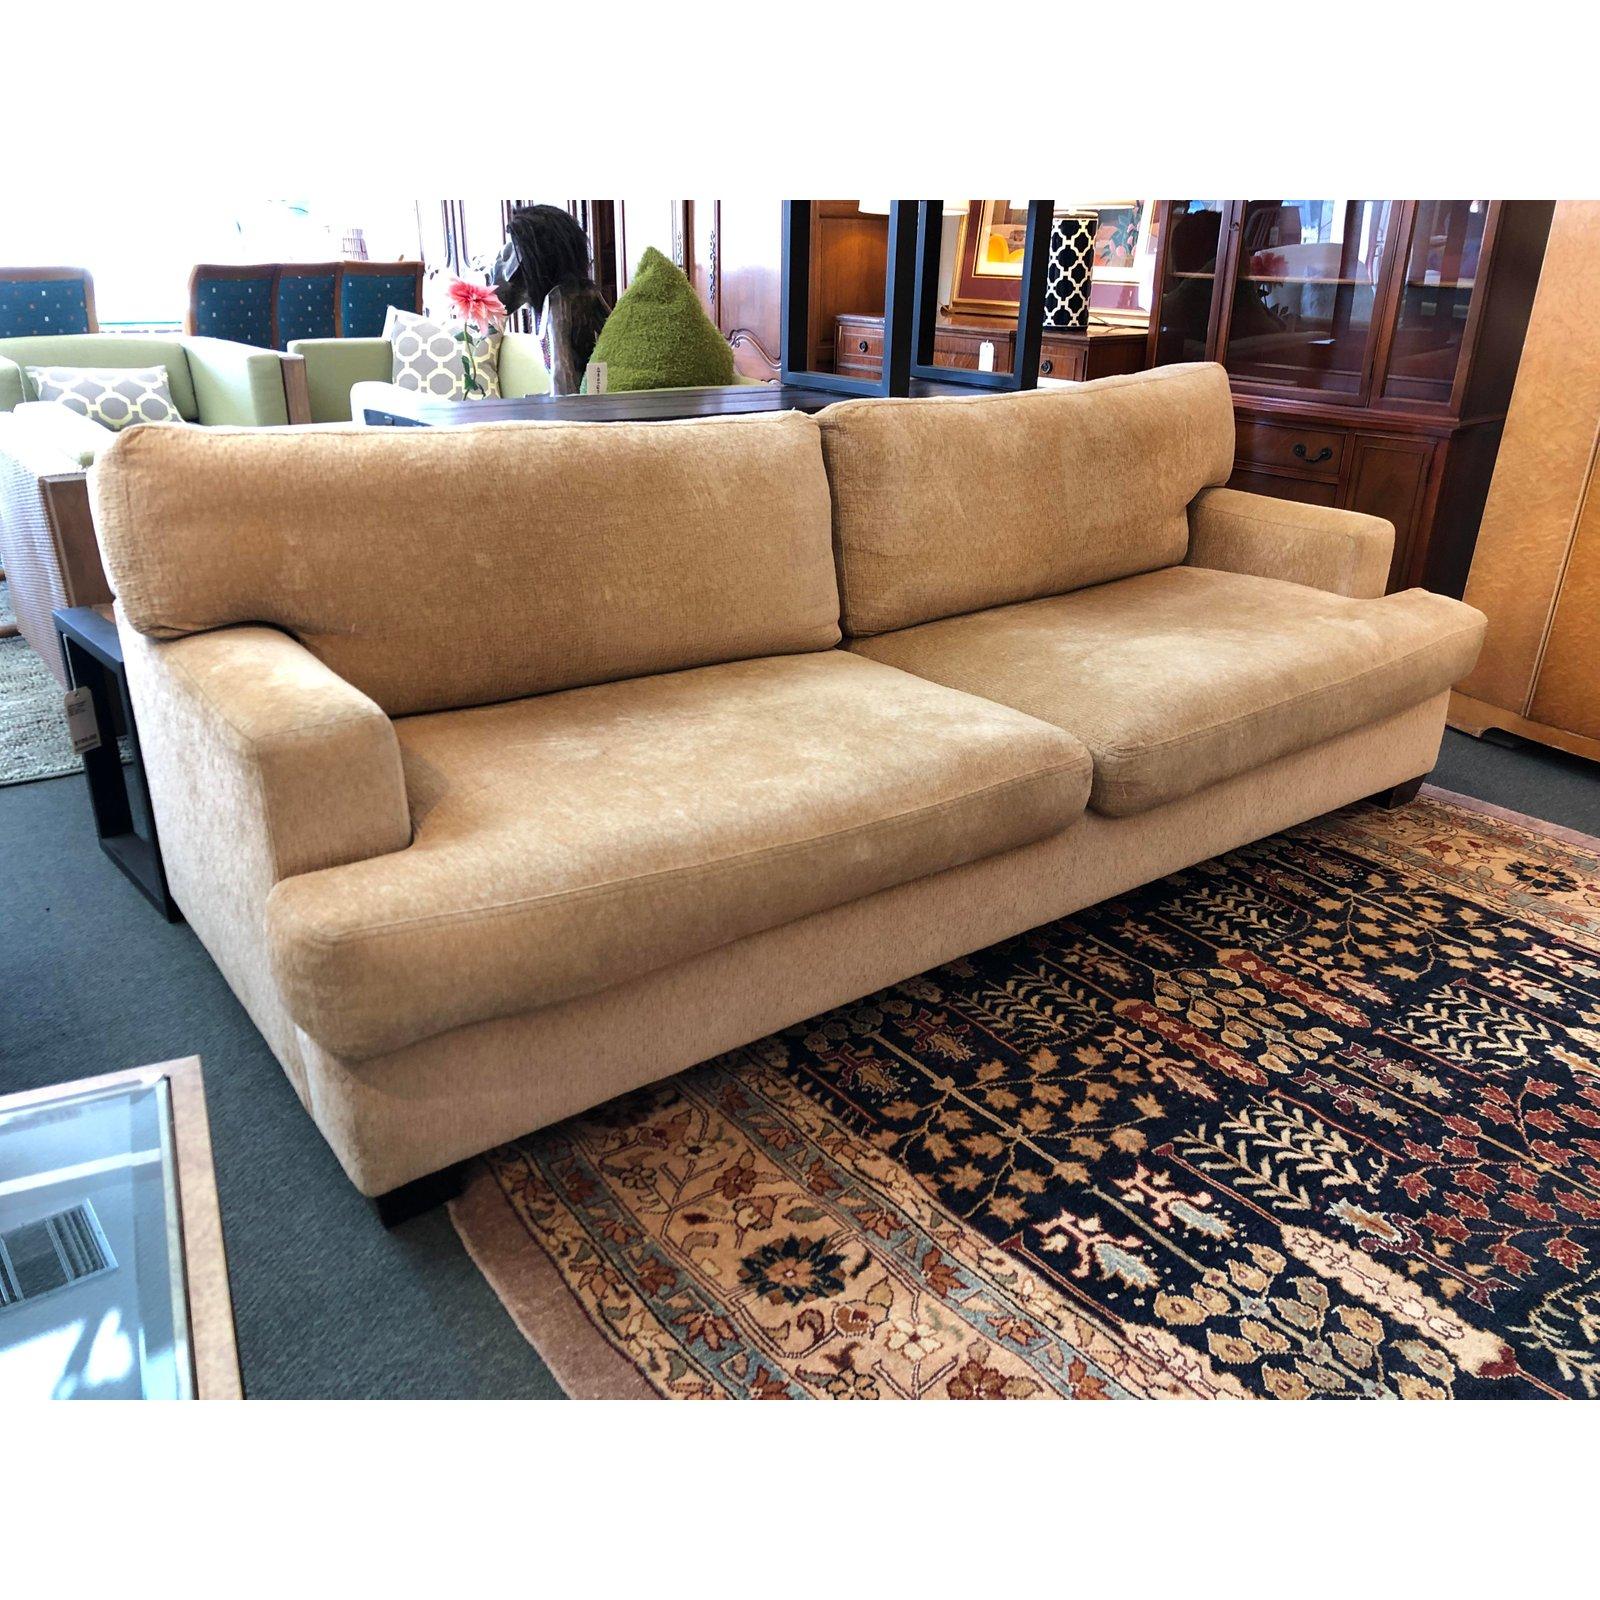 96 inch lounging sofa. Simple lines softened with down-wrapping and textured upholstery. Made in LA, handcrafted, FSC Certified Wood, Goose Feathers & Down, Low-Voc Stains,



Measures: Seat height 18 inches
Arm height 23 1/2 inches.